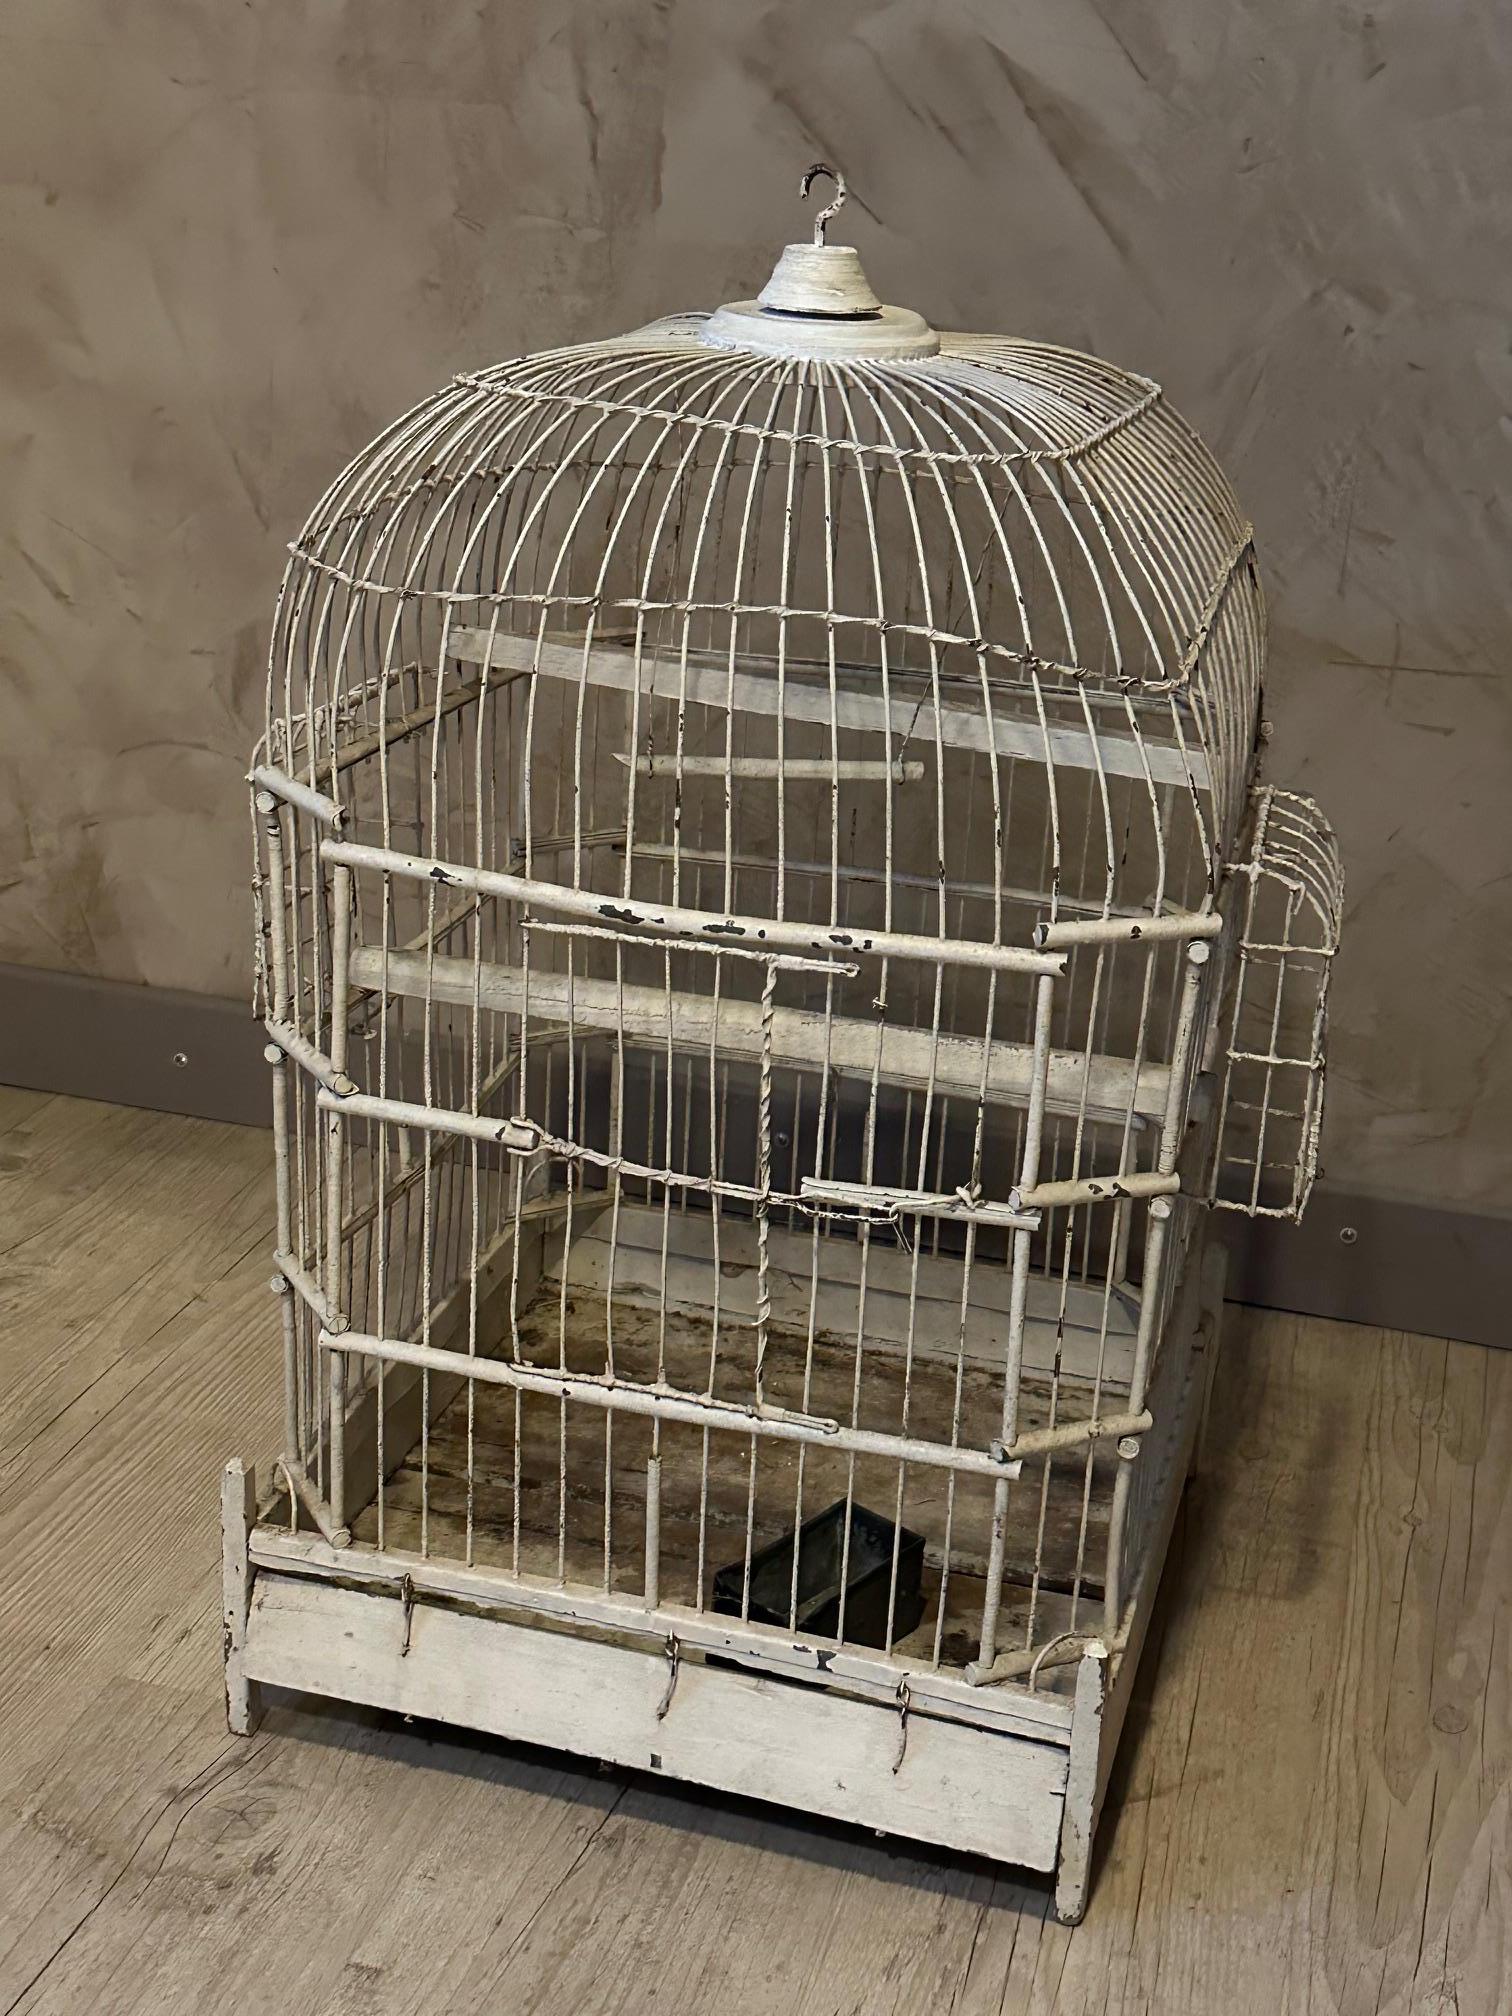 20th century French Painted Metal and Wood Bird Cage, 1920s For Sale 1